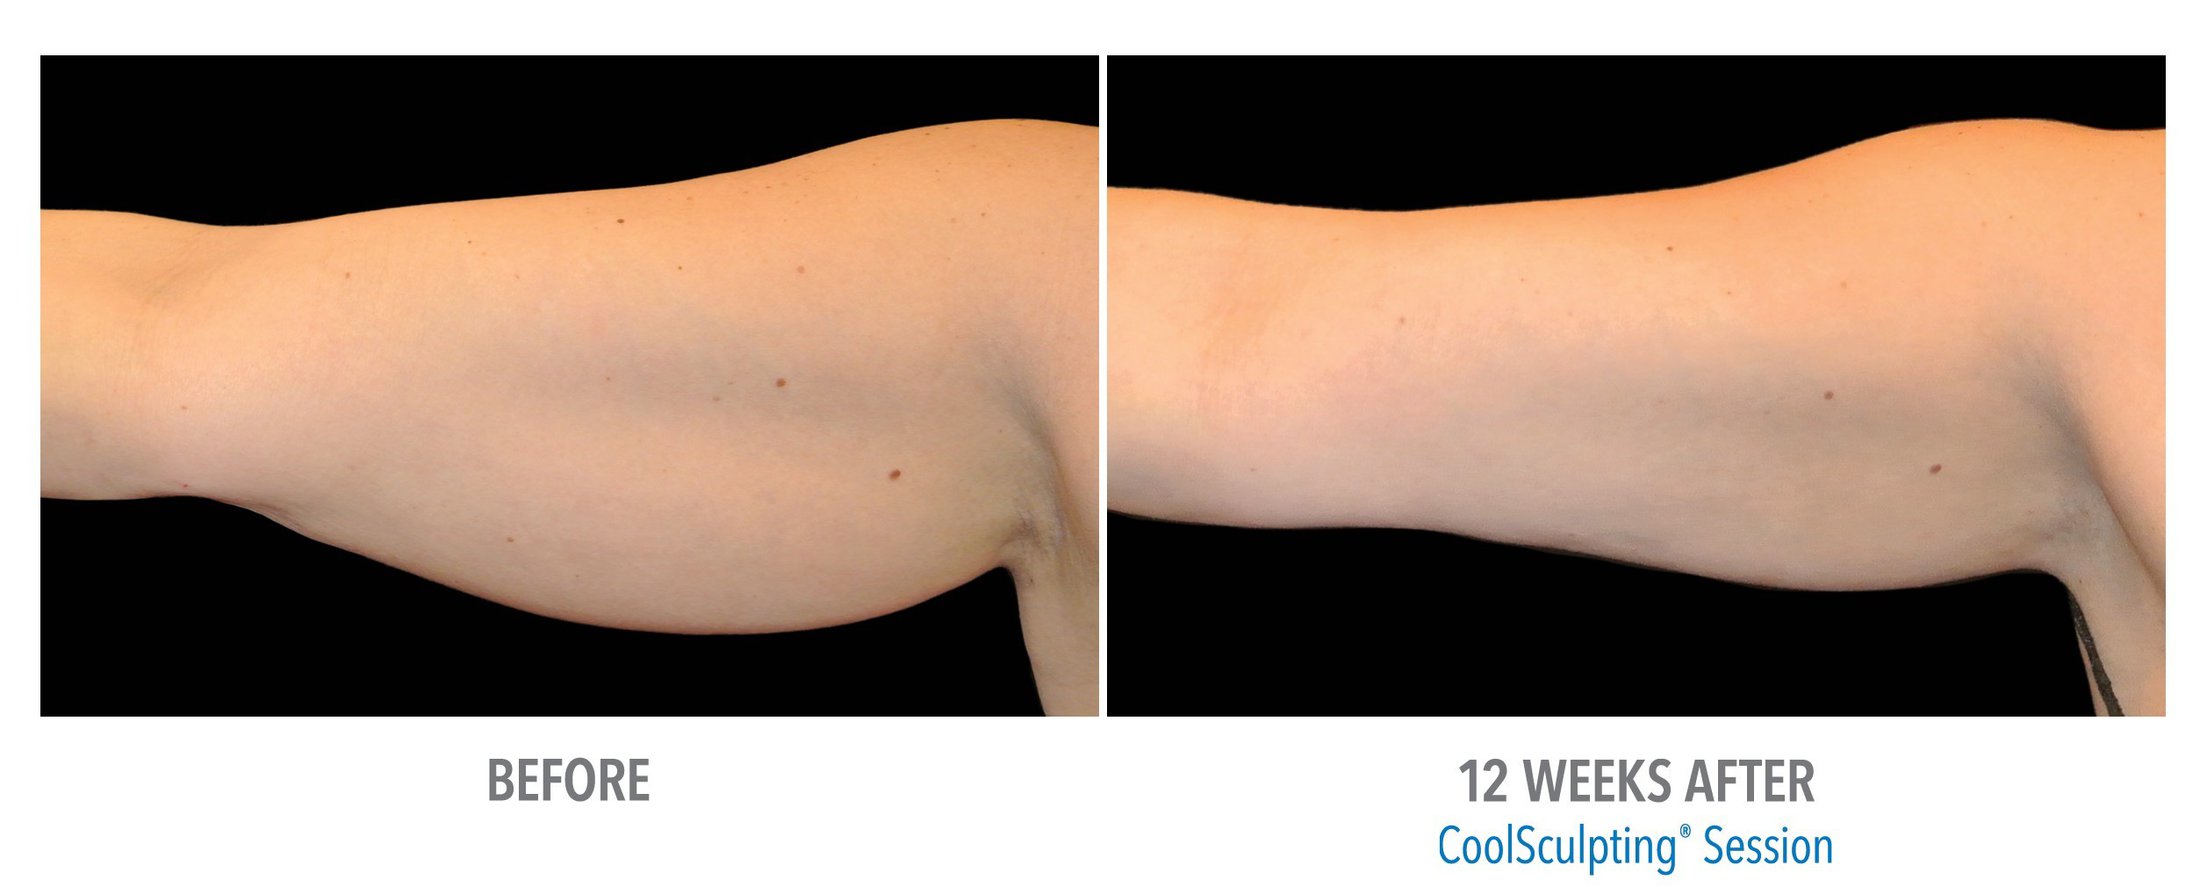 Coolsculpting Before and After Feature 4